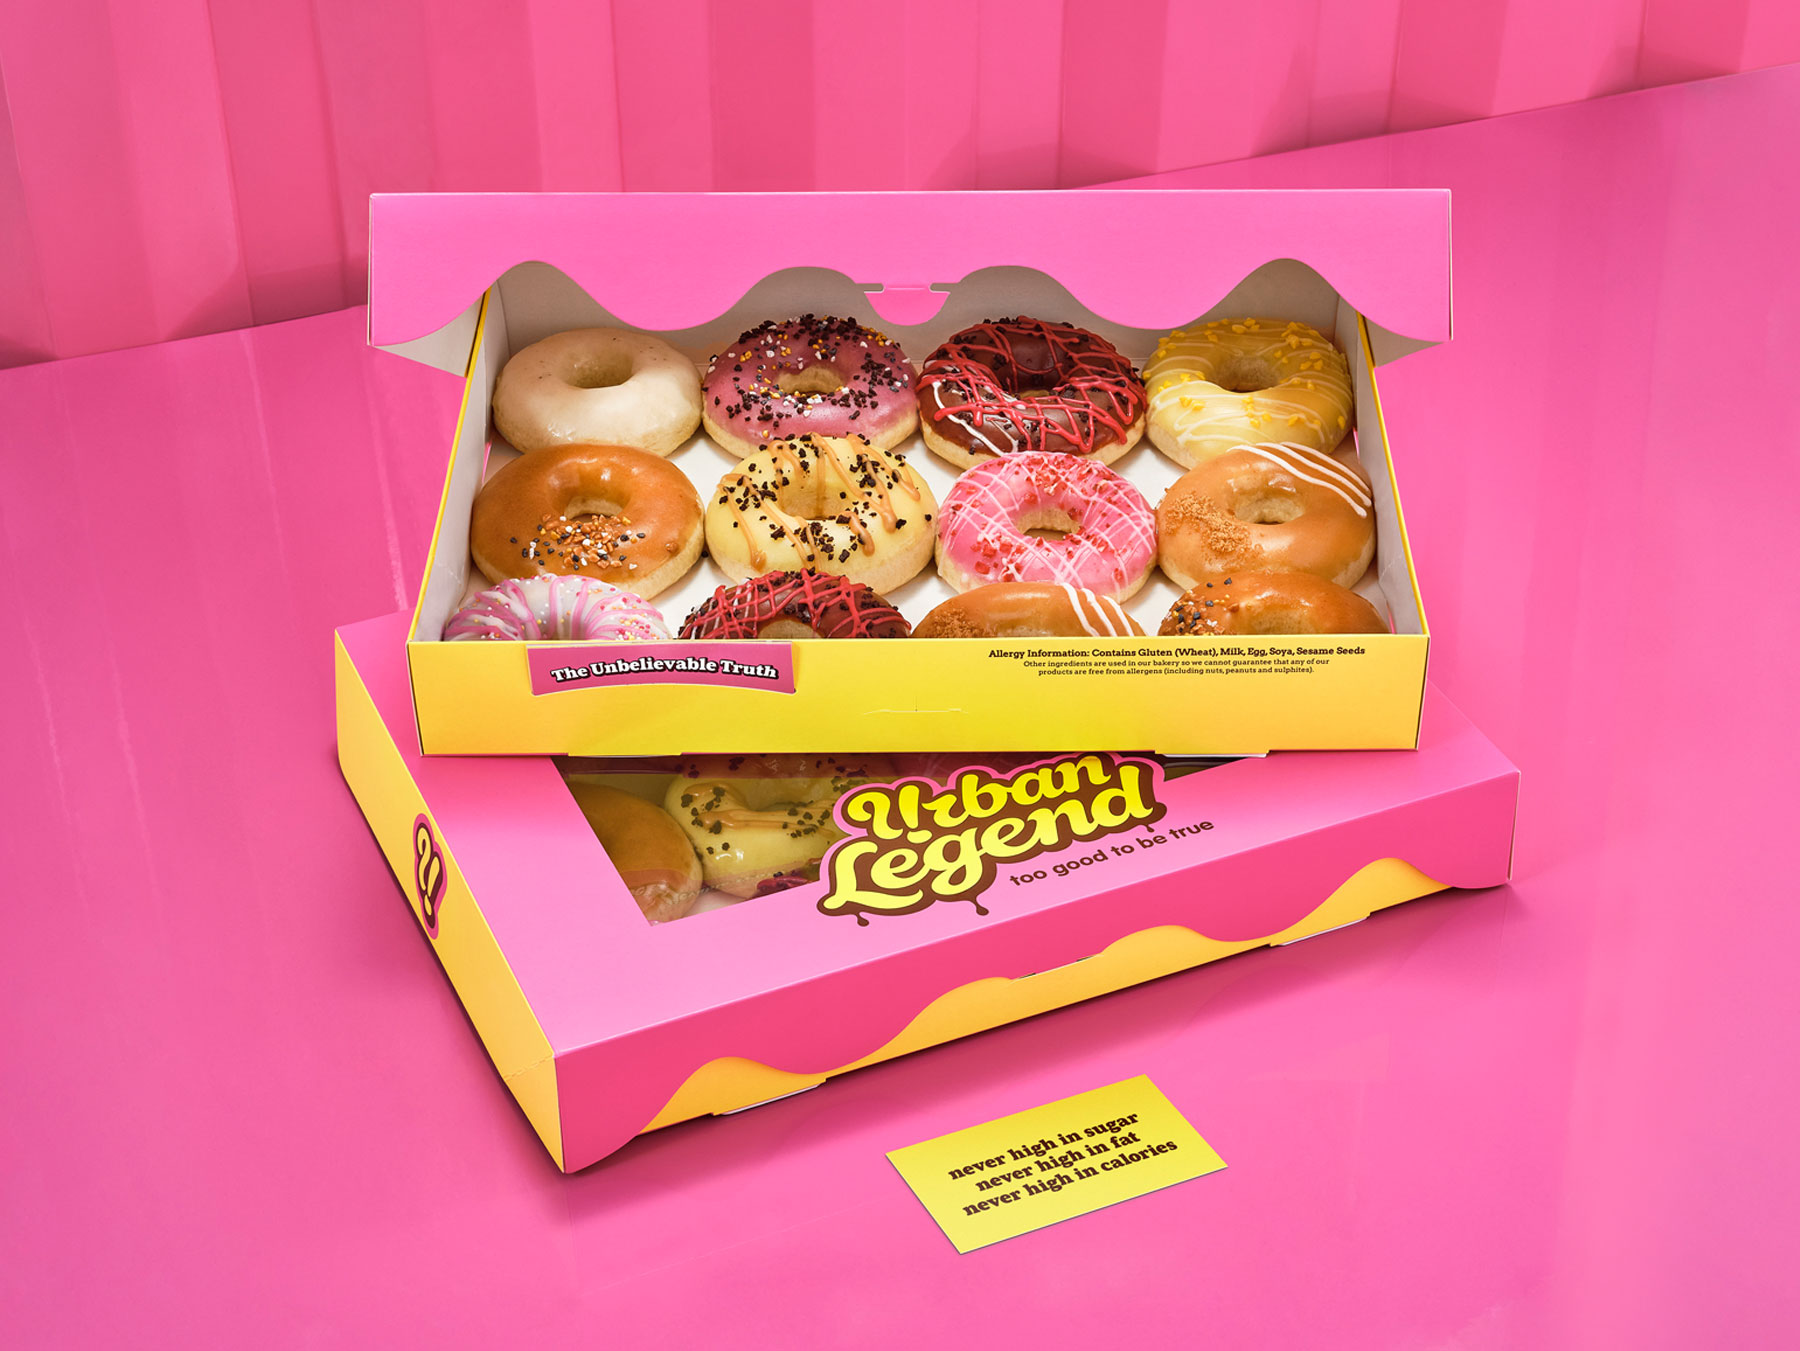 A stack of two Urban Legend donut boxes on a pink background. One box is open showing the donuts design by Biles Hendry